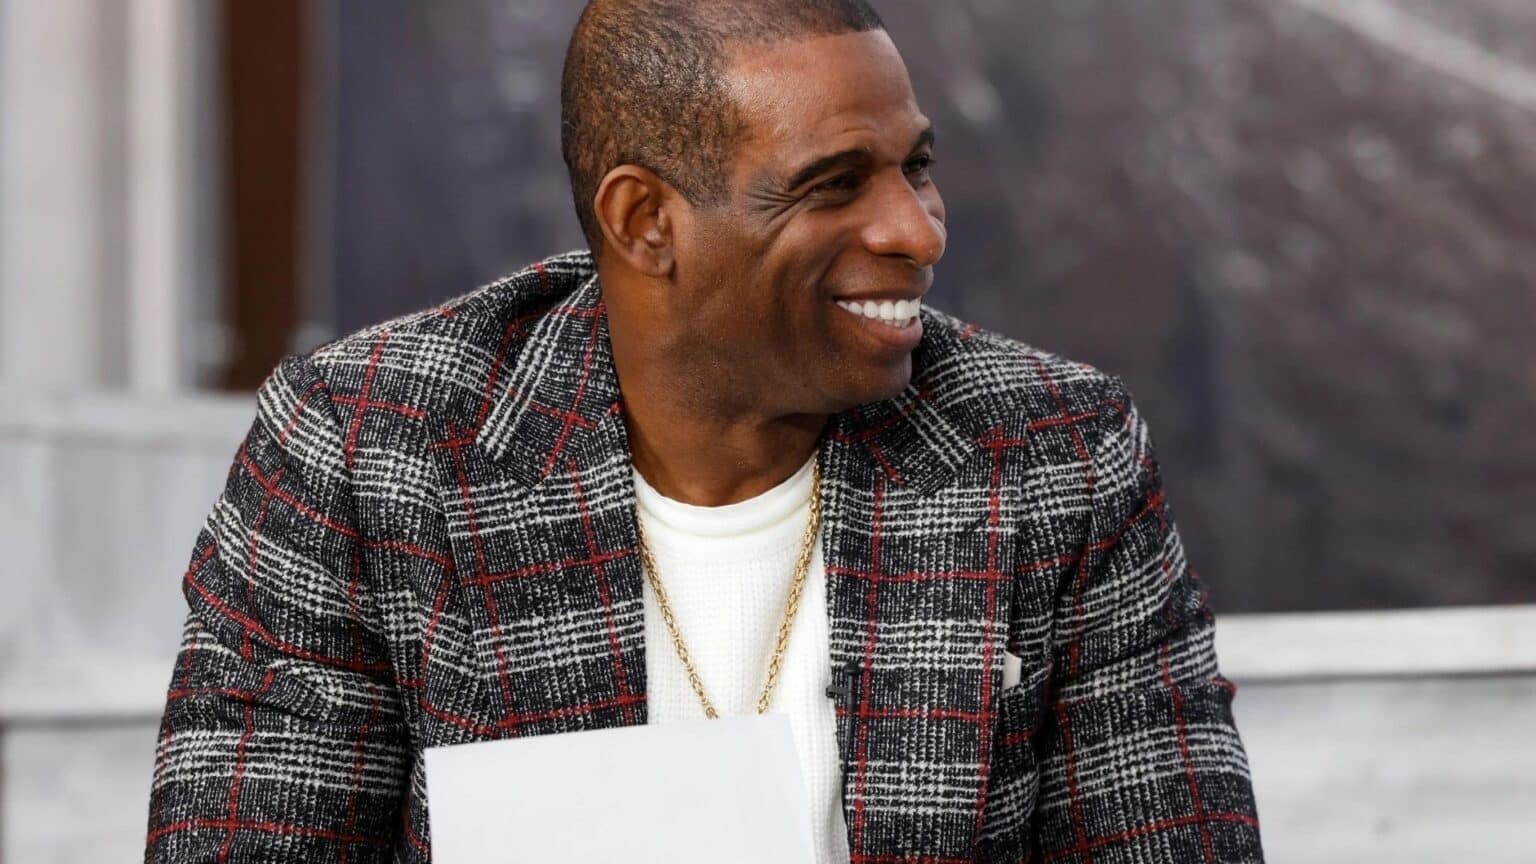 Deion Sanders: What Is Net Worth Of This Personality From America?